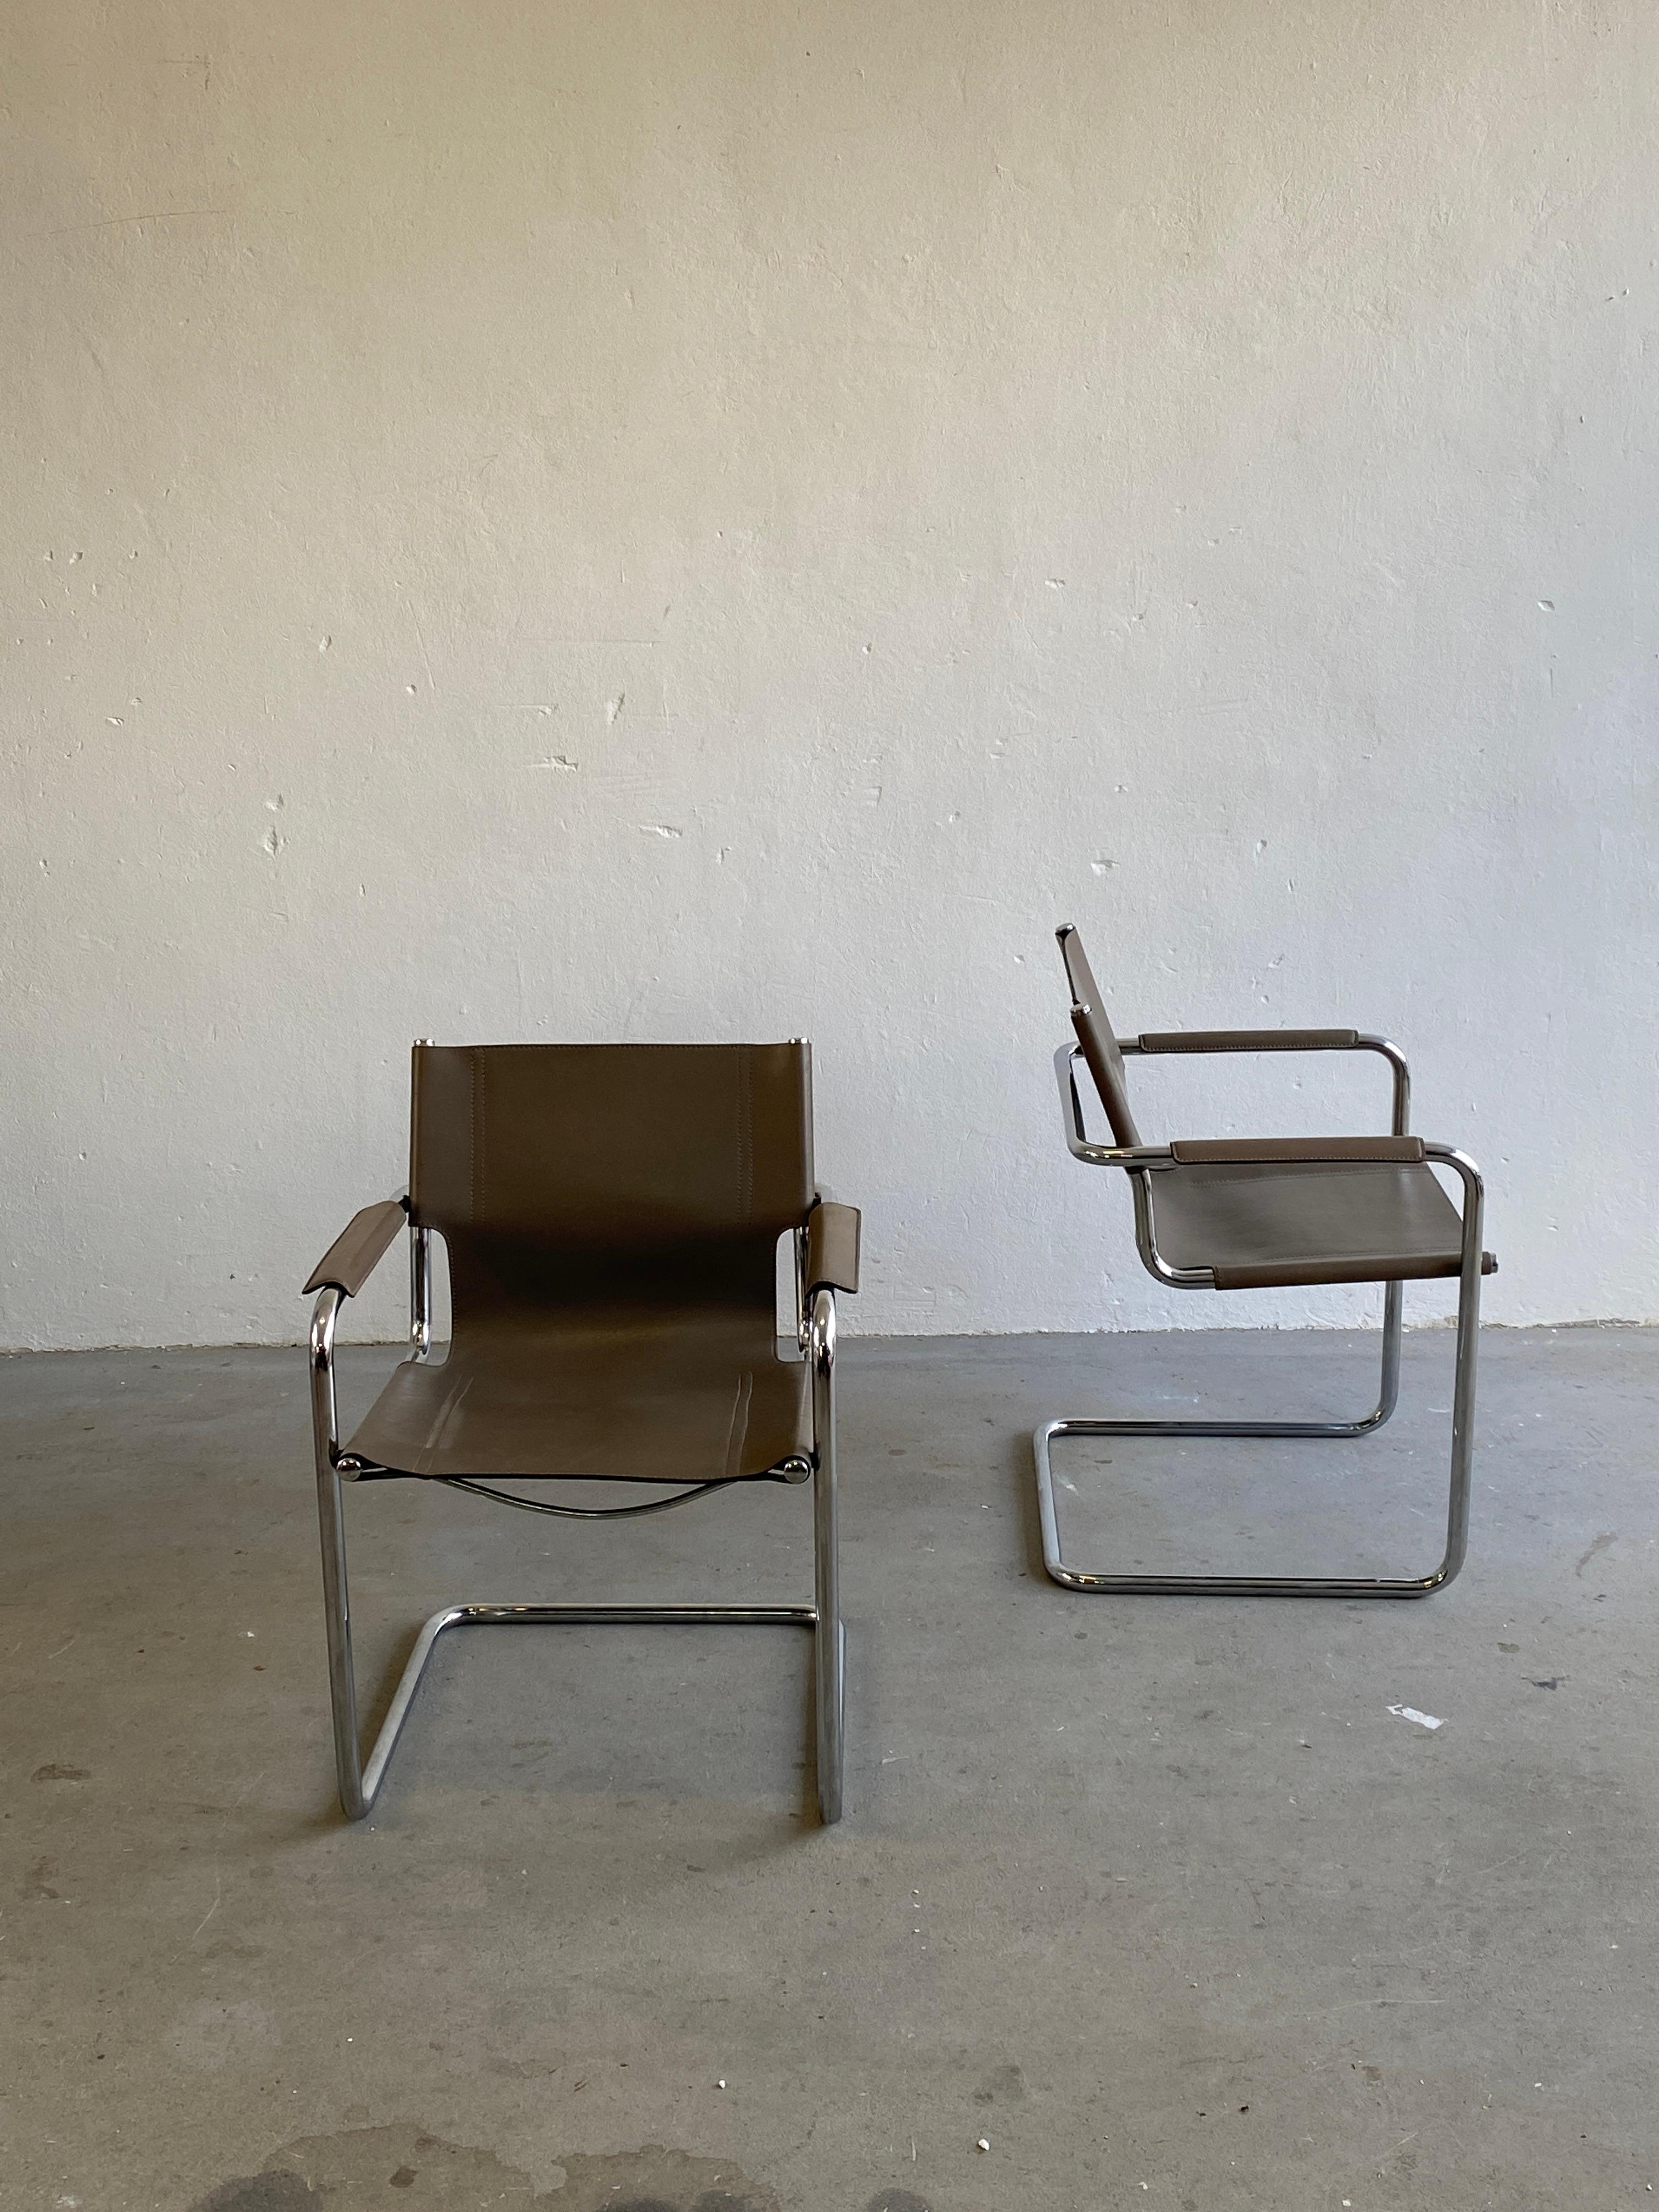 Vintage Leather Cantilever Chairs, Centro Studi for Matteo Grassi, 1980s Italy 1